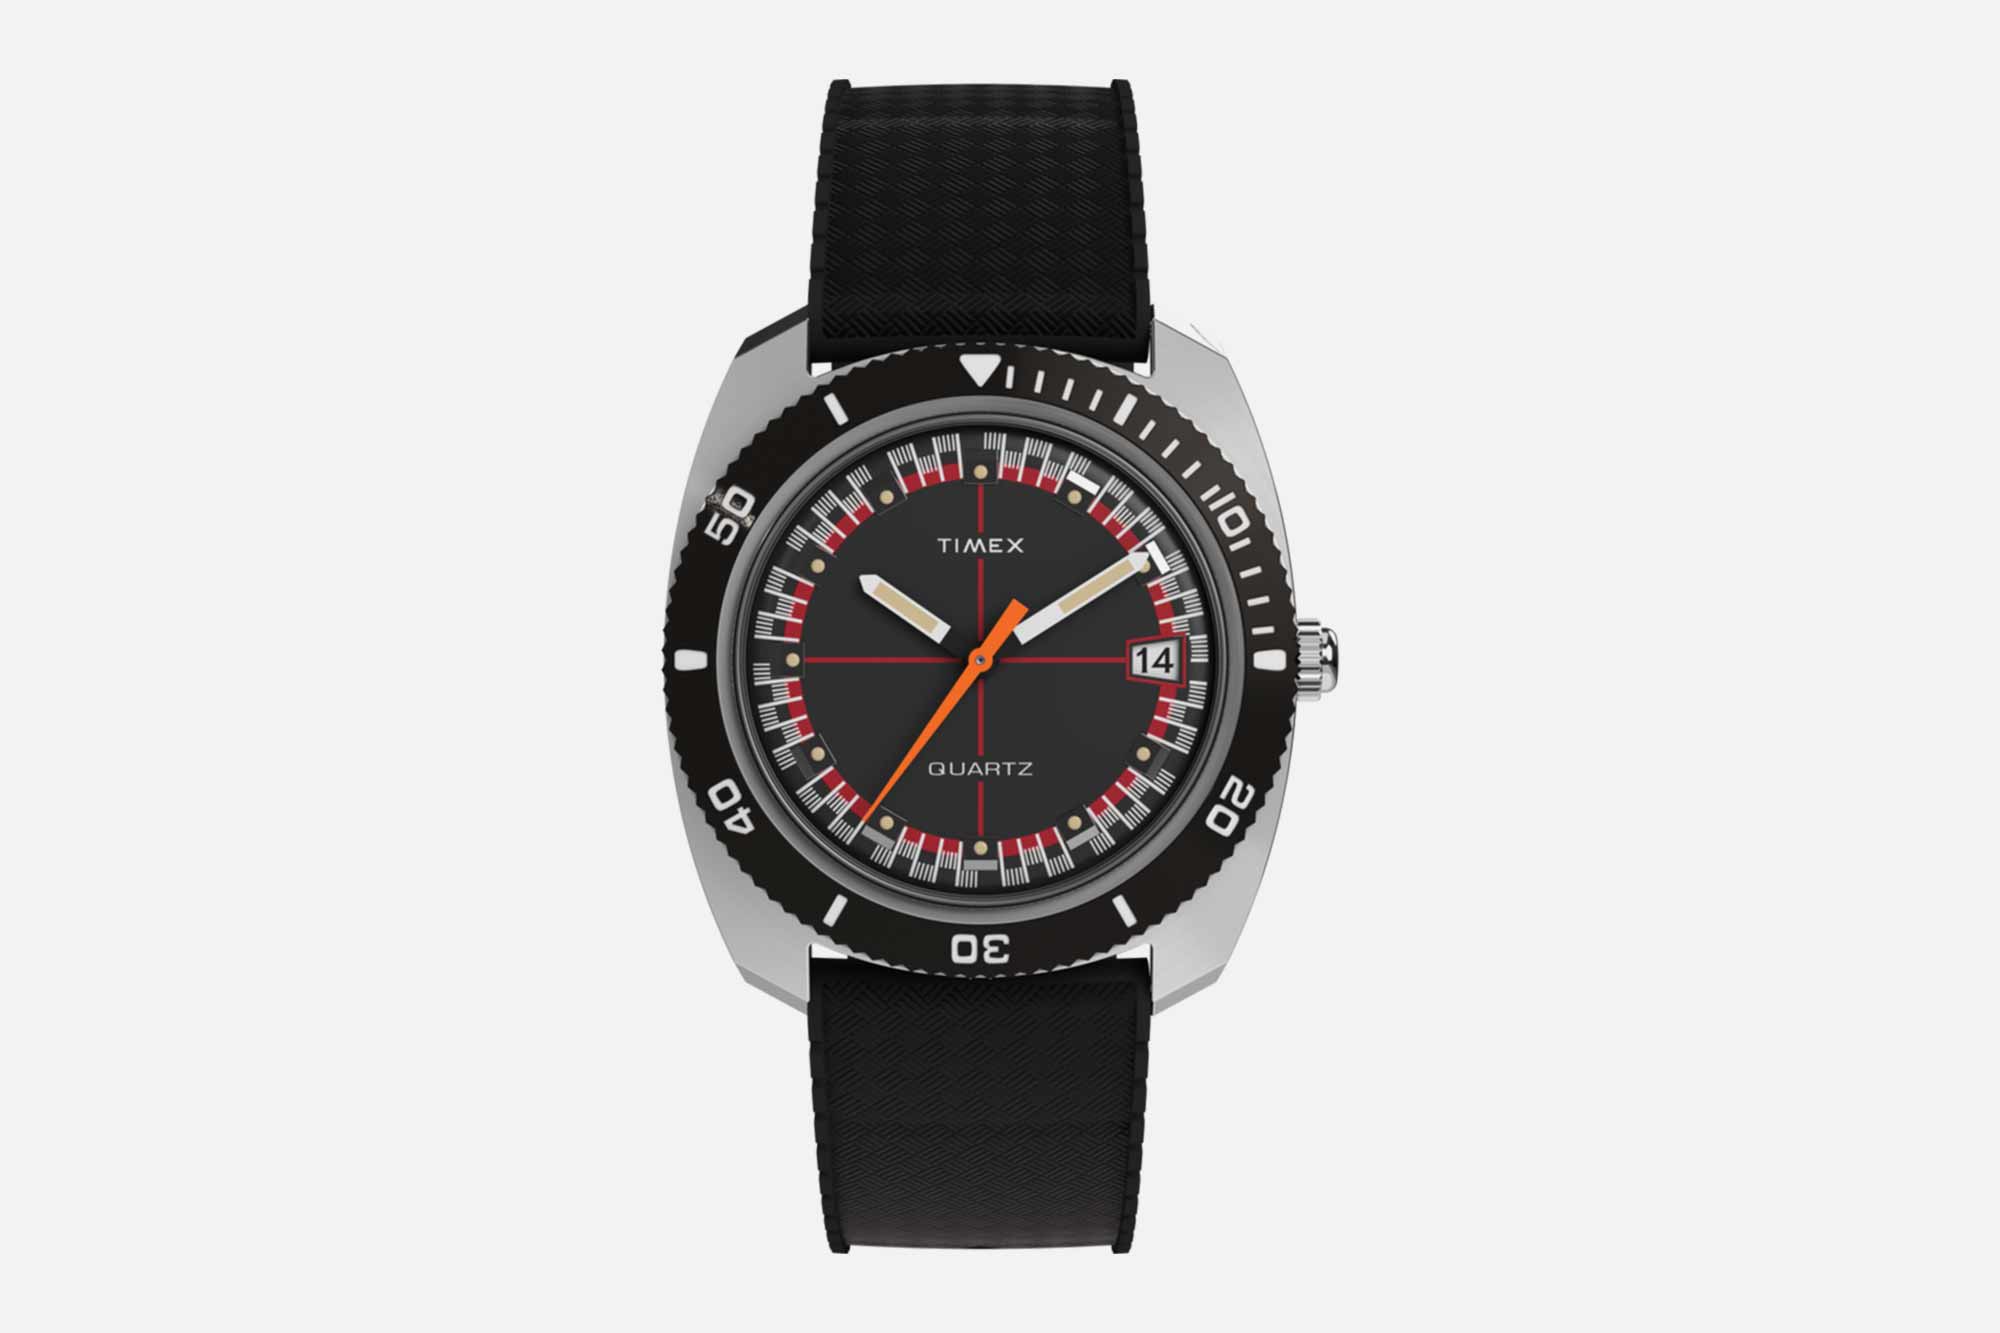 Timex Adds New Vintage Inspired Watches to the Q Collection